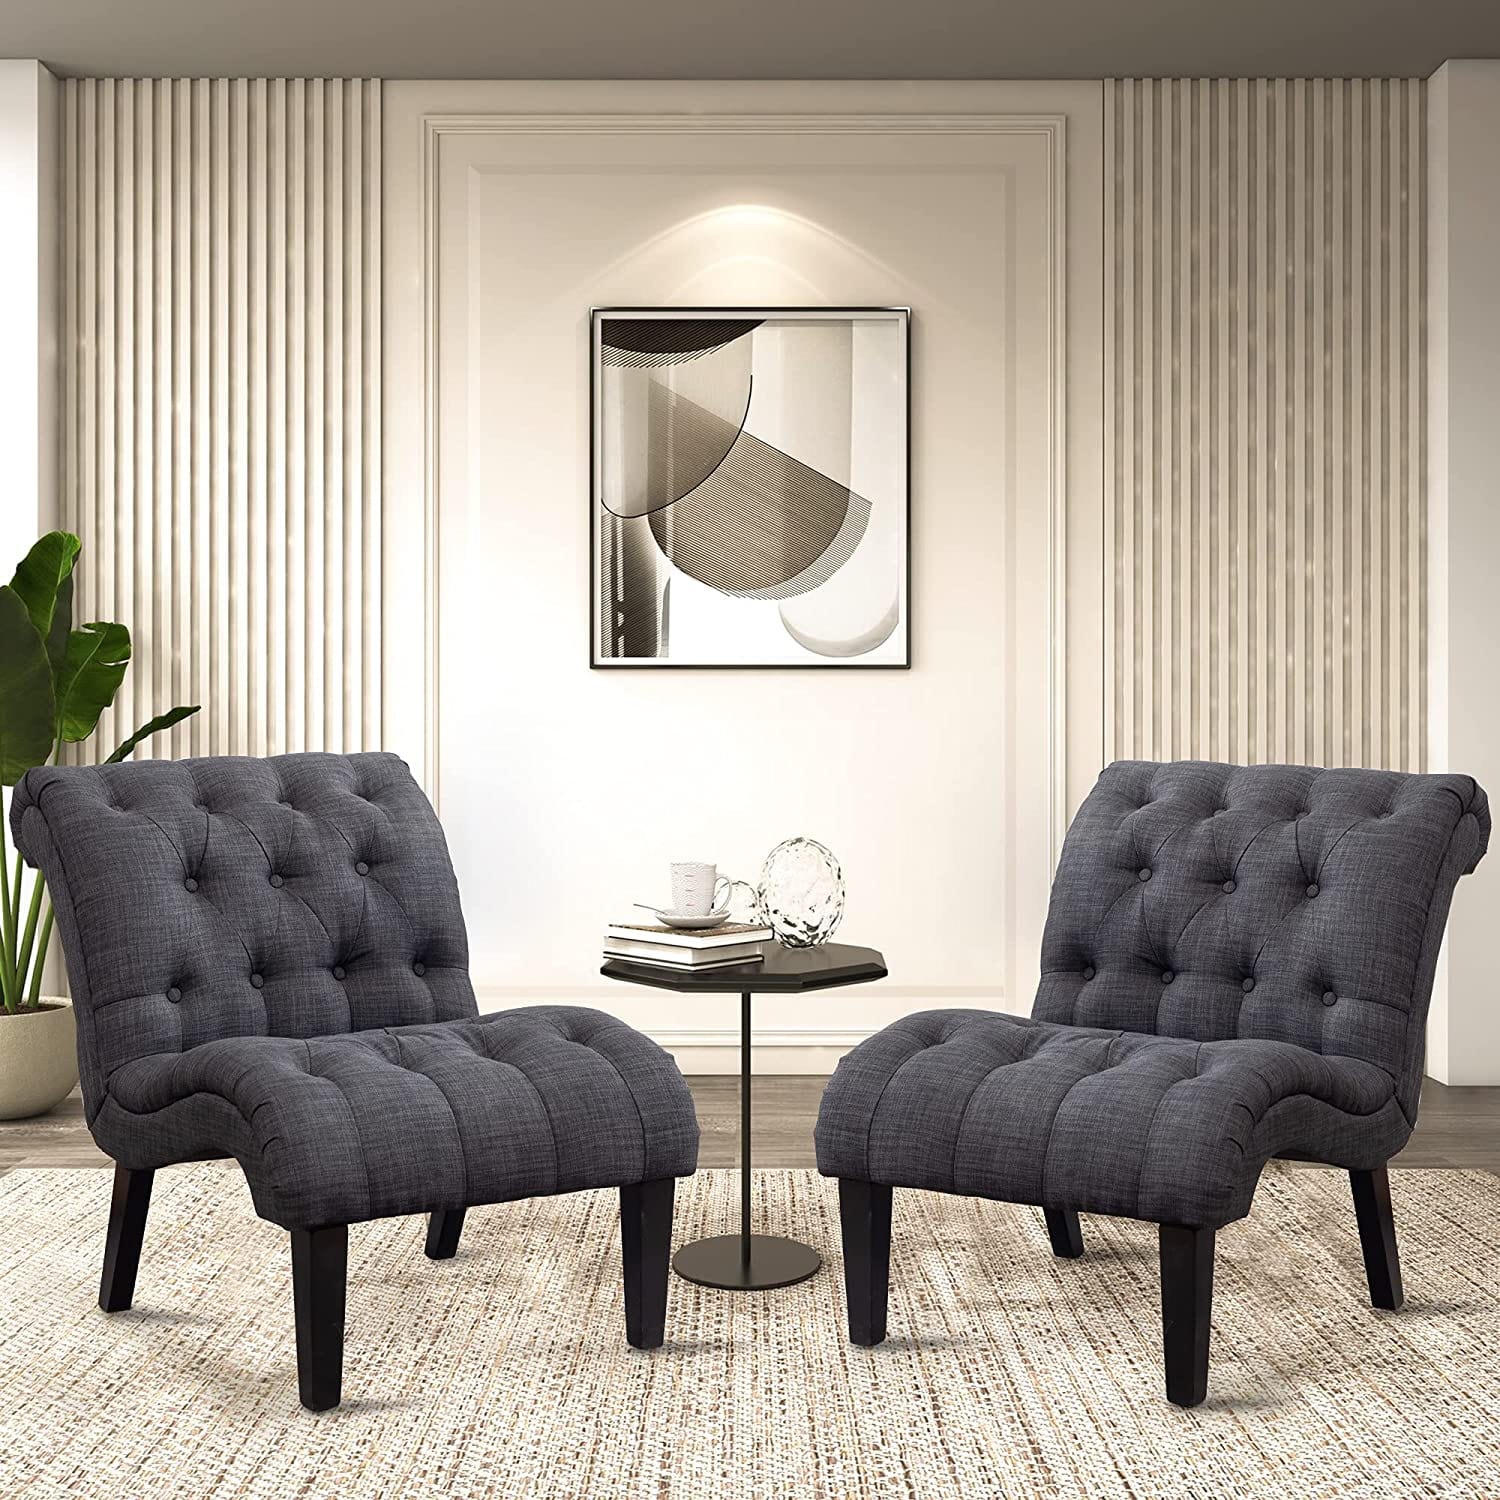 Accent Chairs Set of 2 Living Room Bedroom Upholstered Tufted Curved Backrest Fabric Lounge Chair with Wood Legs